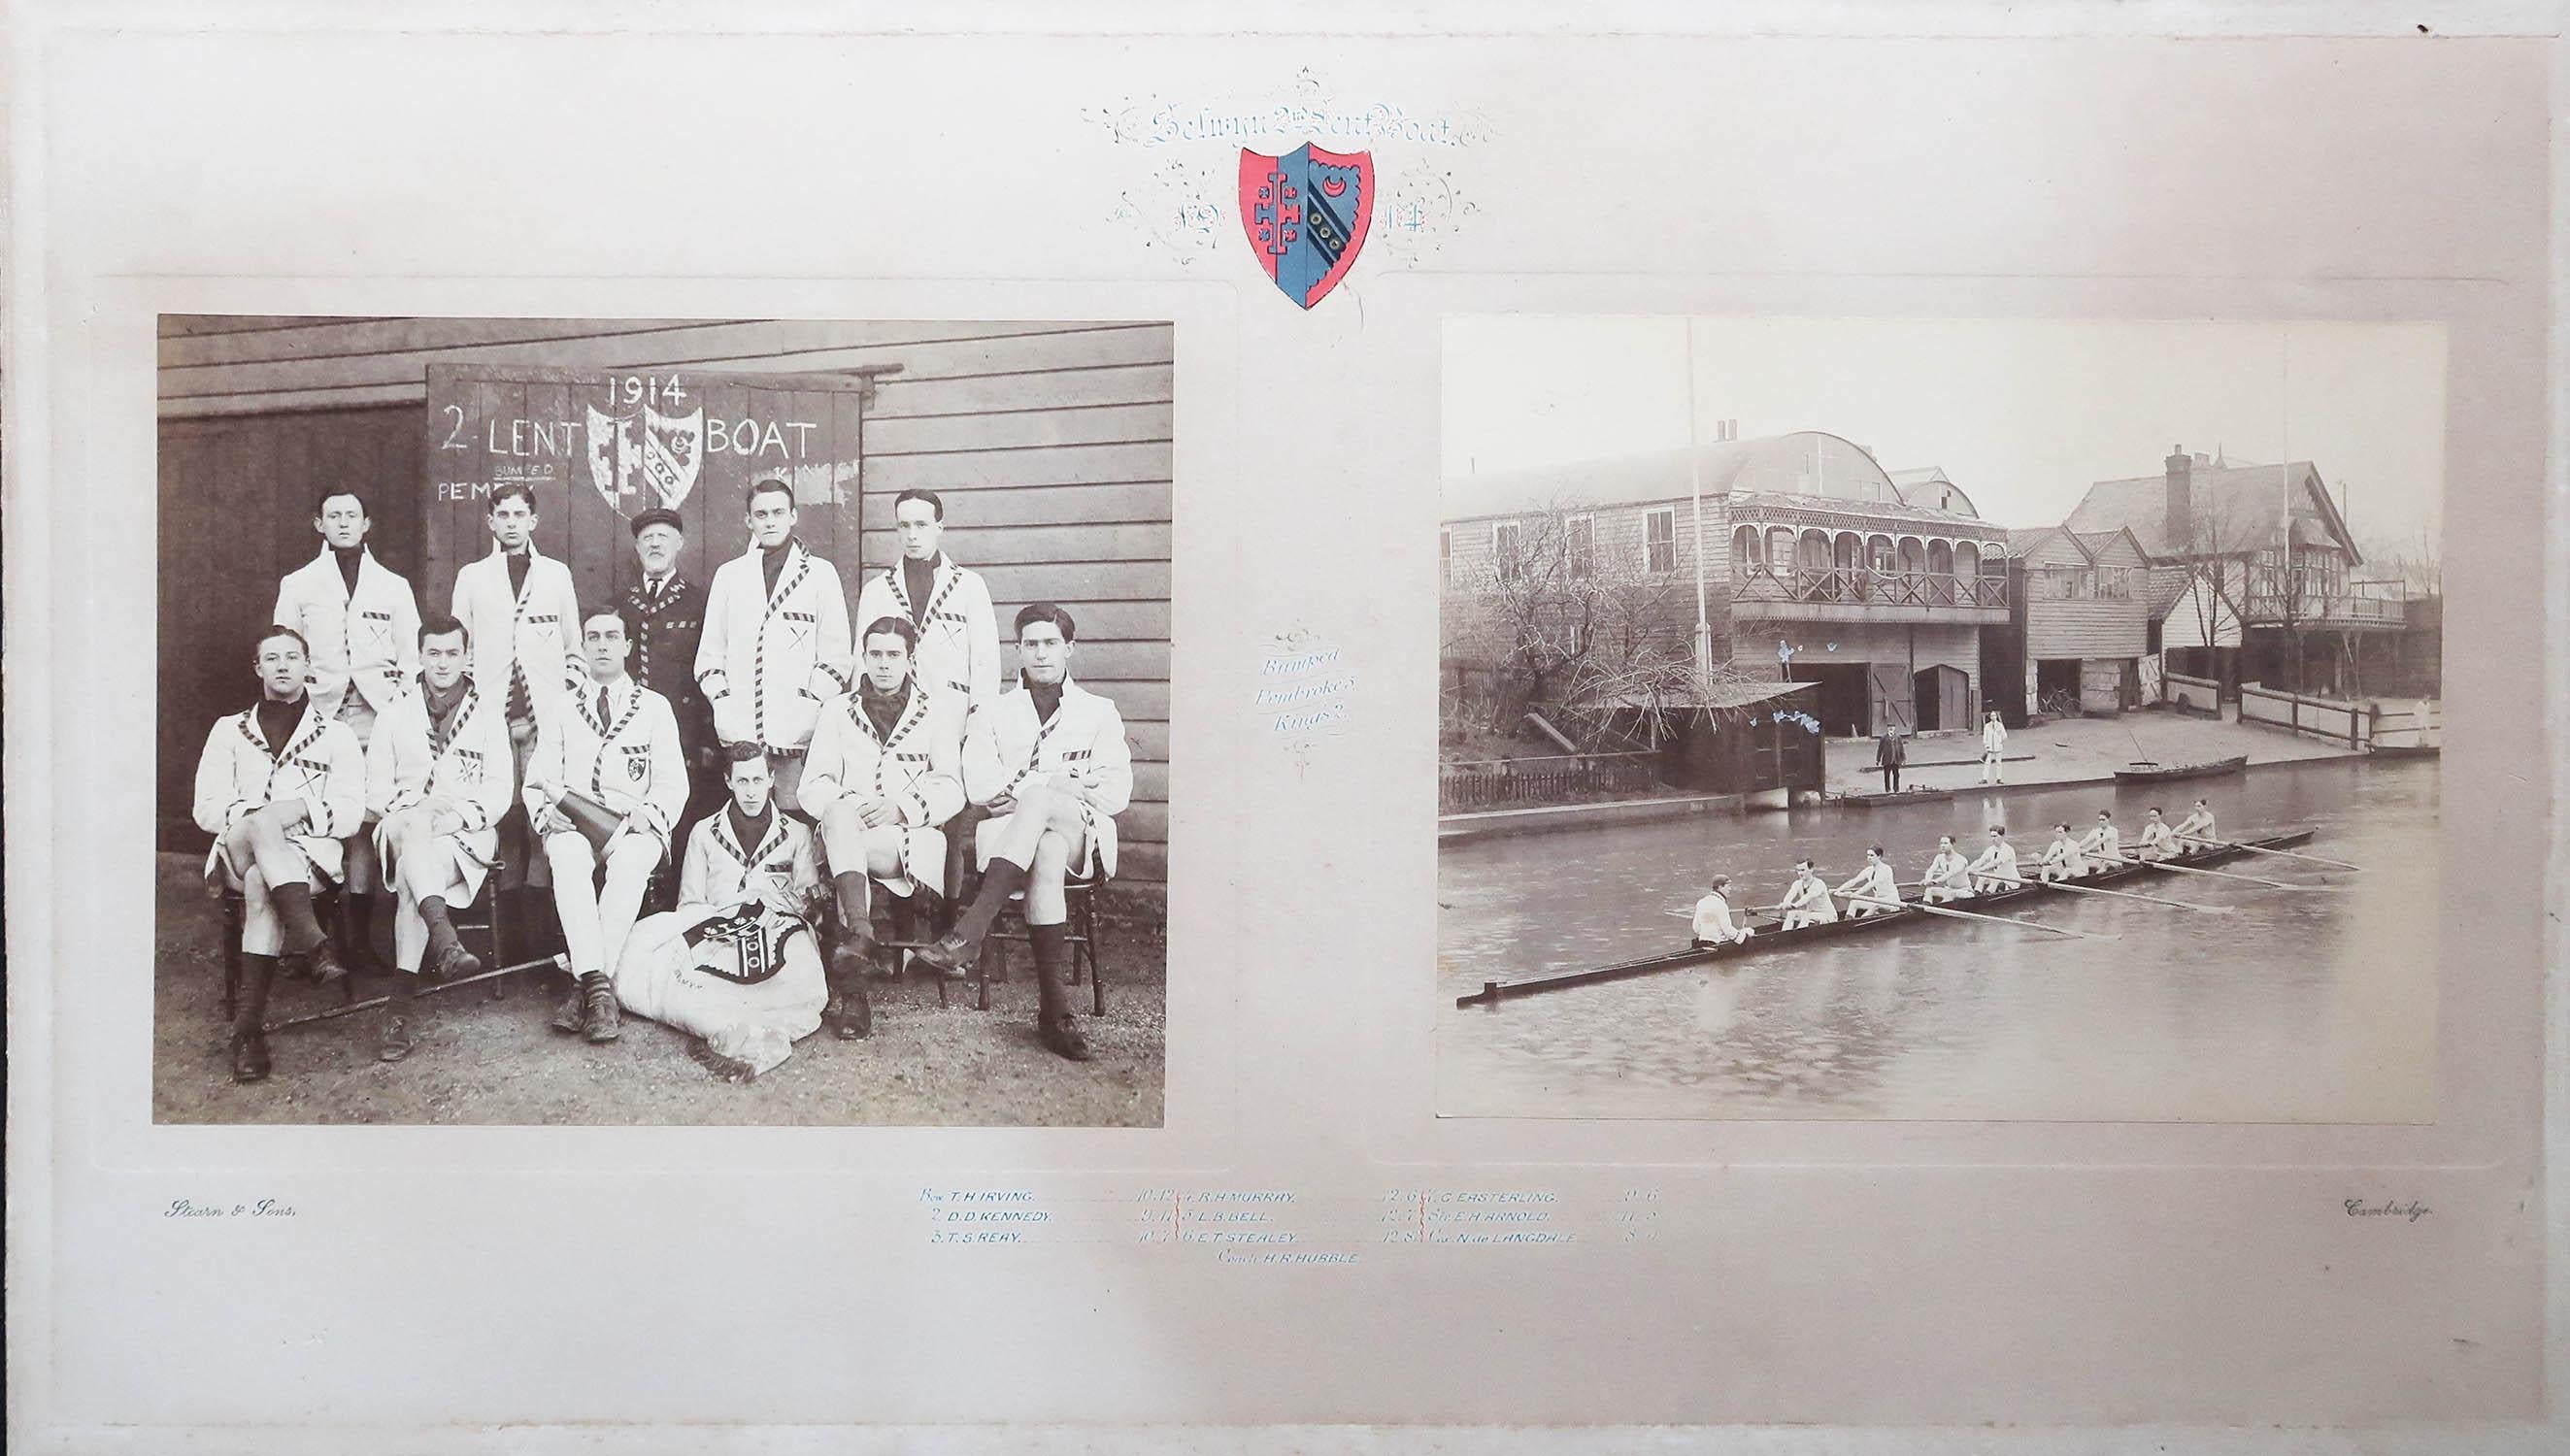 English Original Vintage Photograph of A Cambridge Rowing Team. Dated 1914